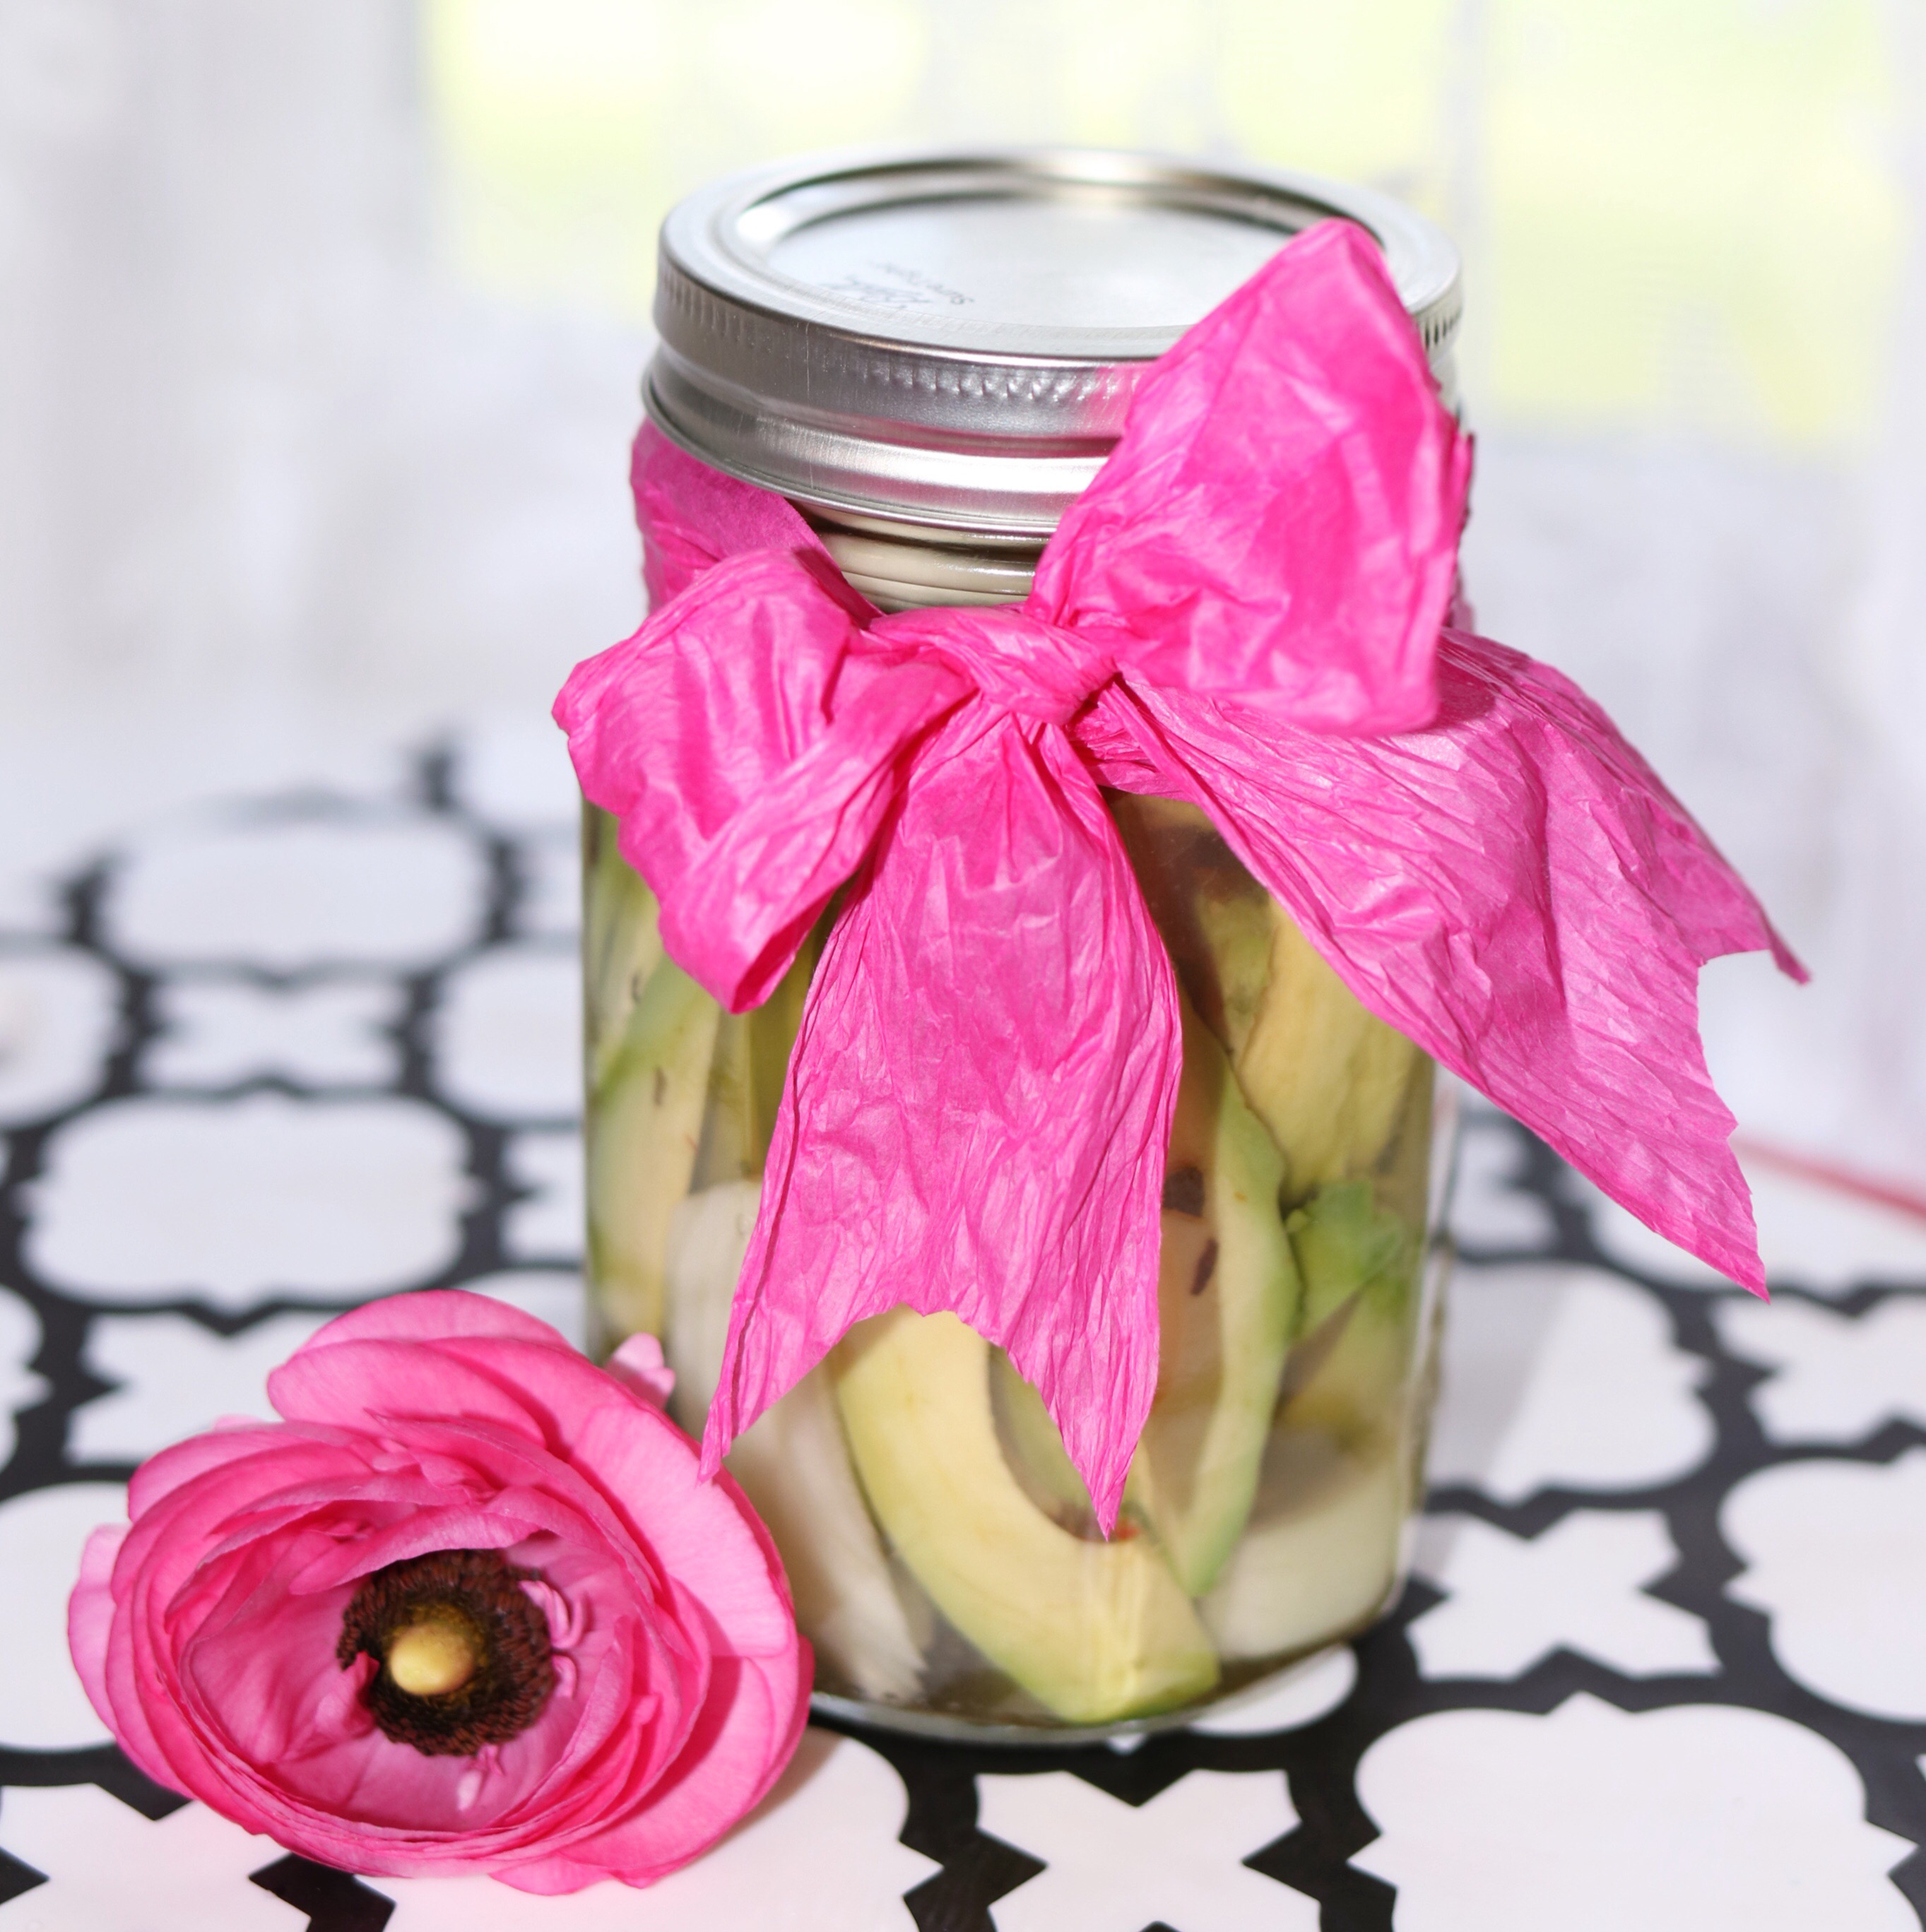 How To Make Pickled Avocados